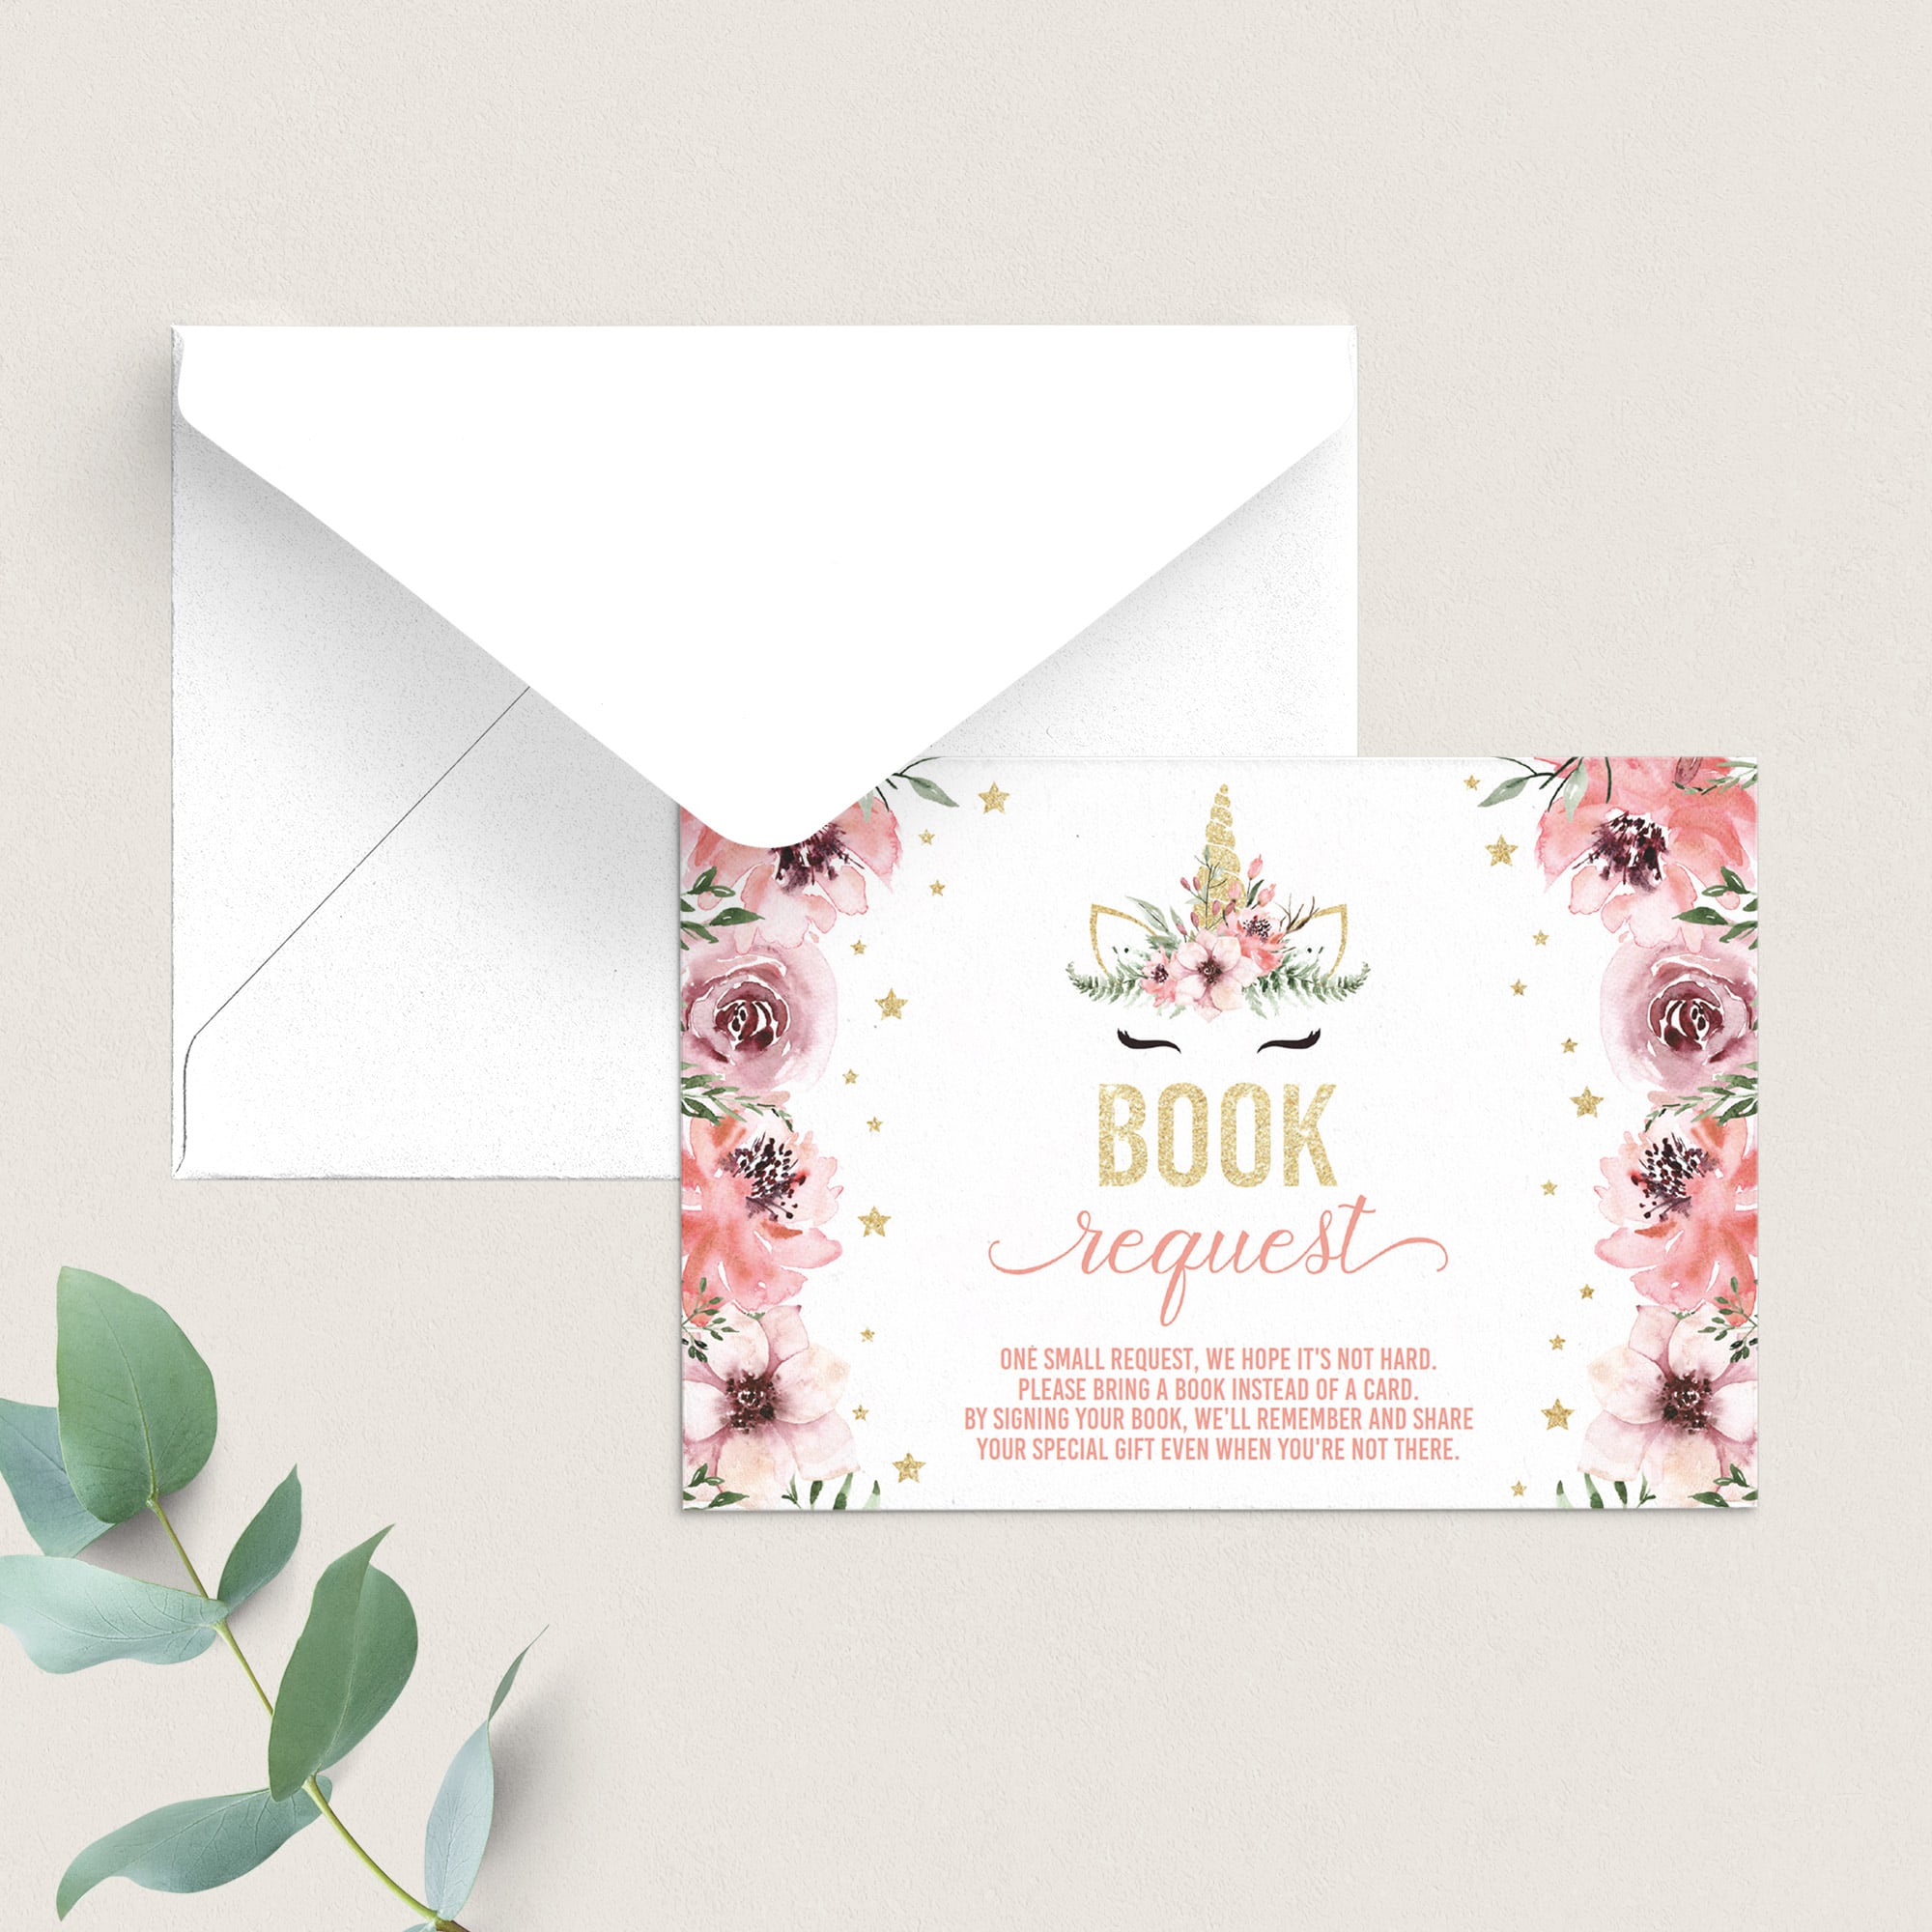 Unicorn BabyShower Book Request Card Download by LittleSizzle